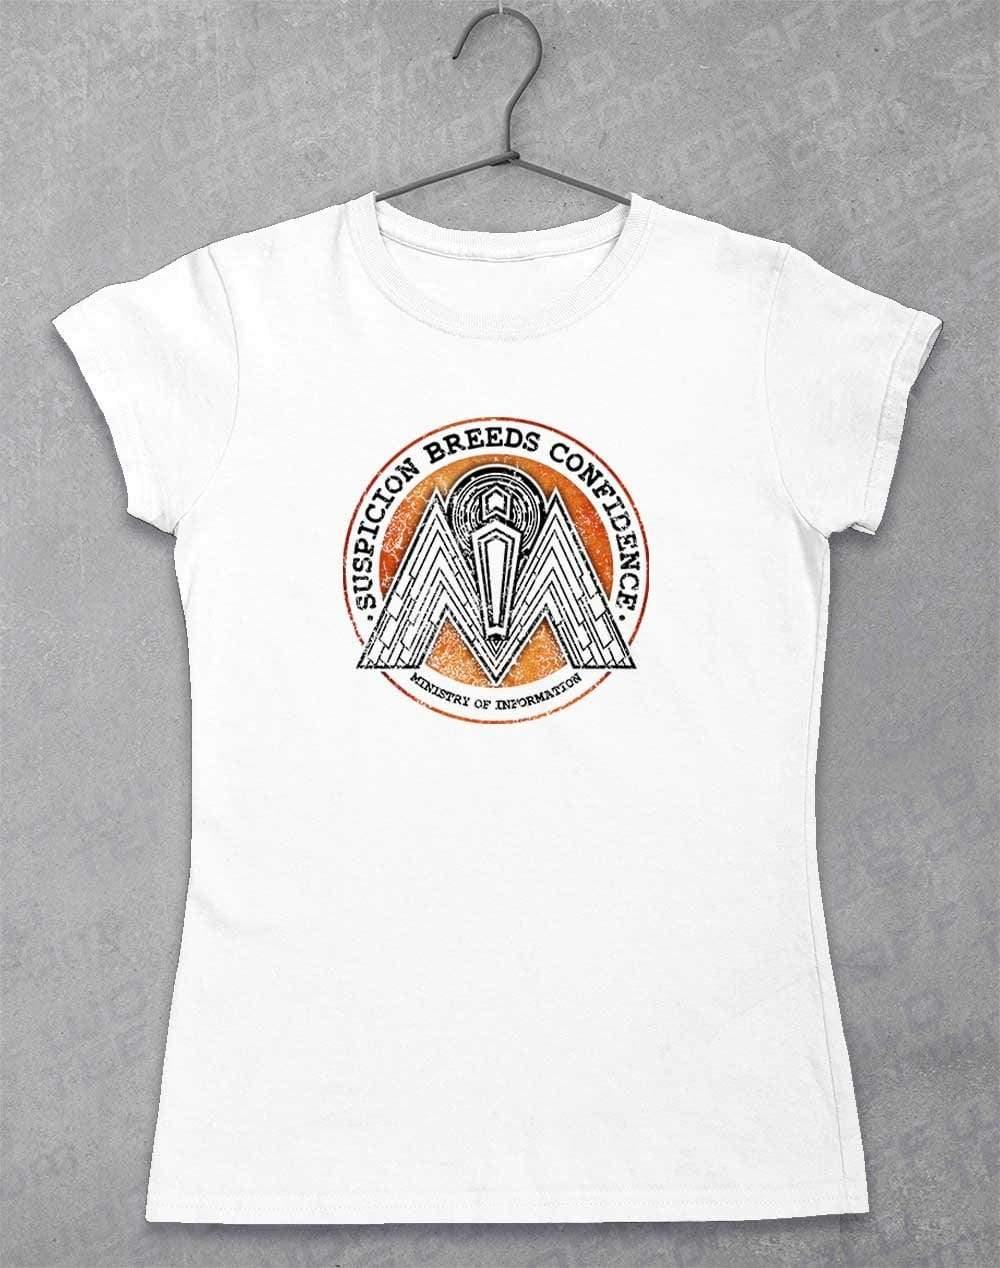 Ministry of Information Women's T-Shirt 8-10 / White  - Off World Tees